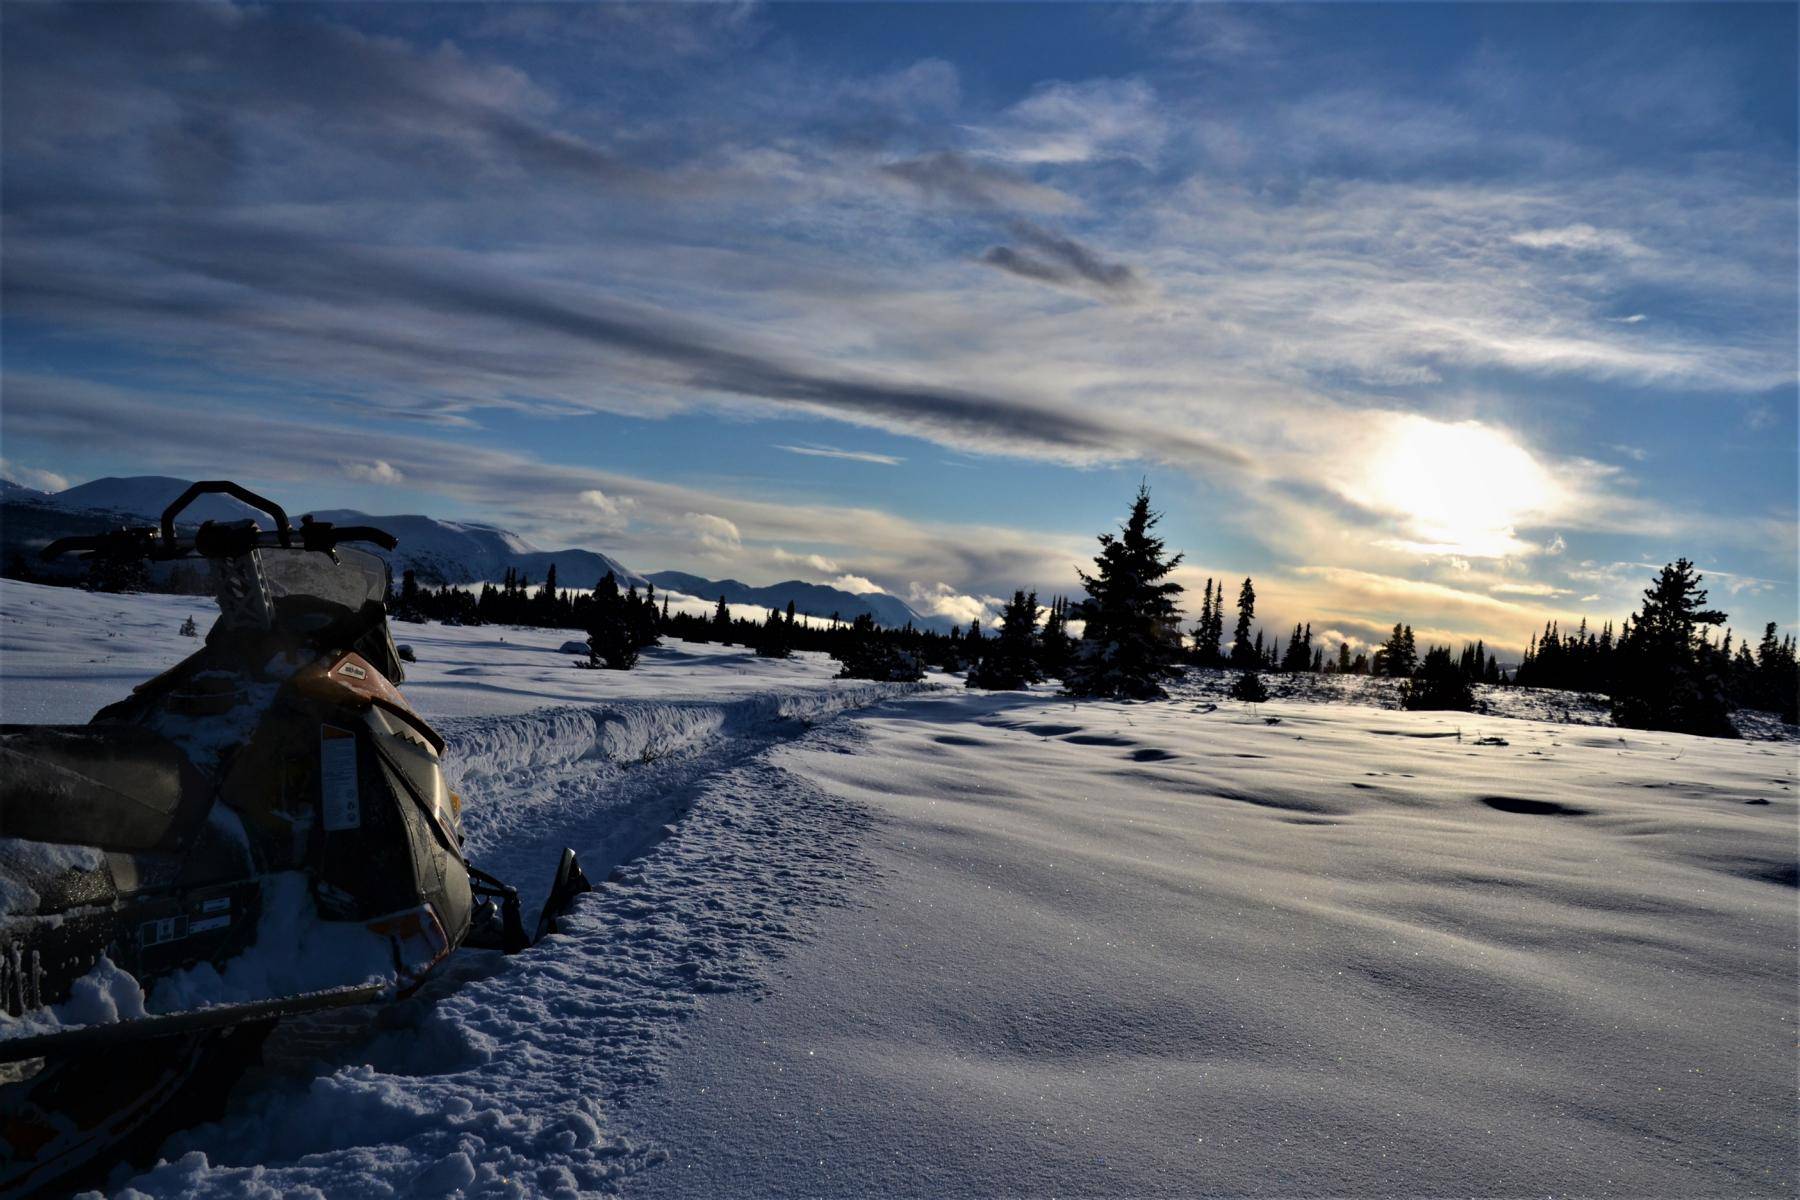 Sundown over a snowy landscape with a skidoo on a track in the foreground